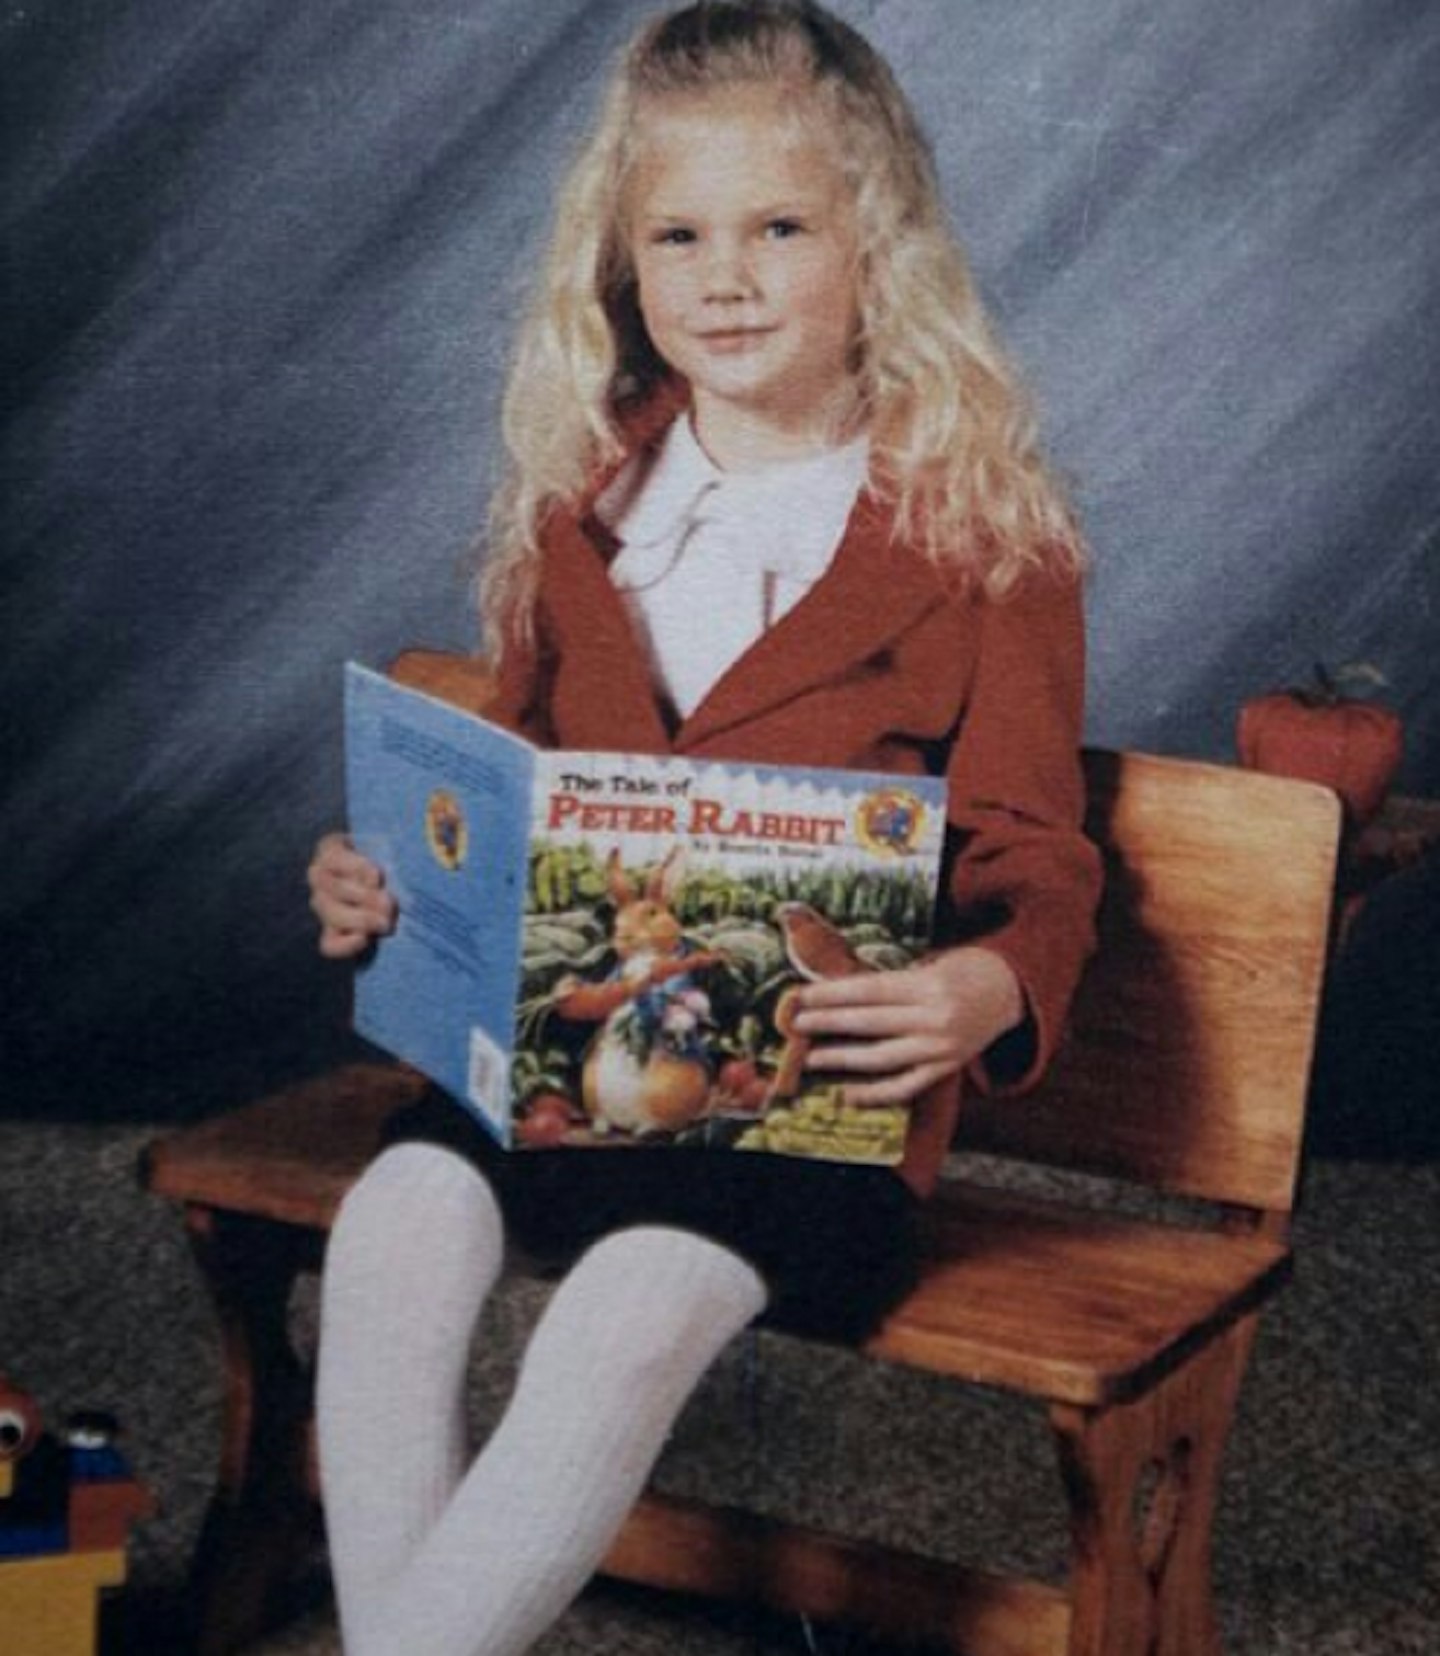 She has embarrassing childhood throwbacks (just like us!)